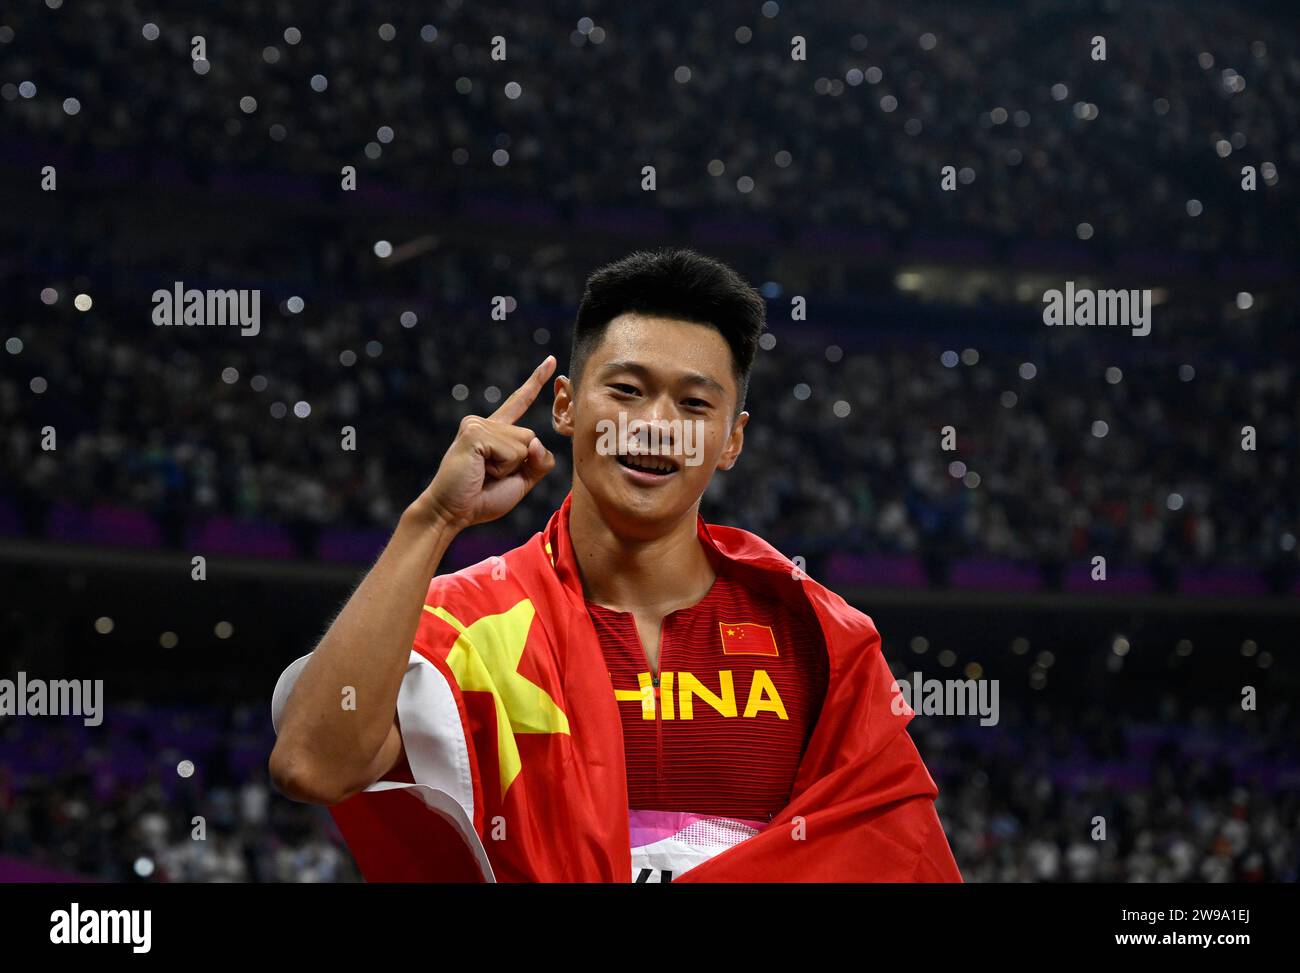 (231226) -- BEIJING, Dec. 26, 2023 (Xinhua) -- As the sporting calendar draws to a close, Xinhua News Agency has selected the top 10 Chinese athletes/teams for 2023:10. Xie Zhenye (male, athletics) Xie stormed to the men's 100m victory at the Asian Games and helped China win the men's 4x100m relay title, thus completing a golden double in Hangzhou. As a member of China's men's 4x100m relay team at the Tokyo Olympic Games, Xie received his reallocated bronze medal at the Hangzhou Asiad. This file photo taken on Sept. 30, 2023 shows Xie Zhenye of China celebrating after winning the Men's 100m F Stock Photo